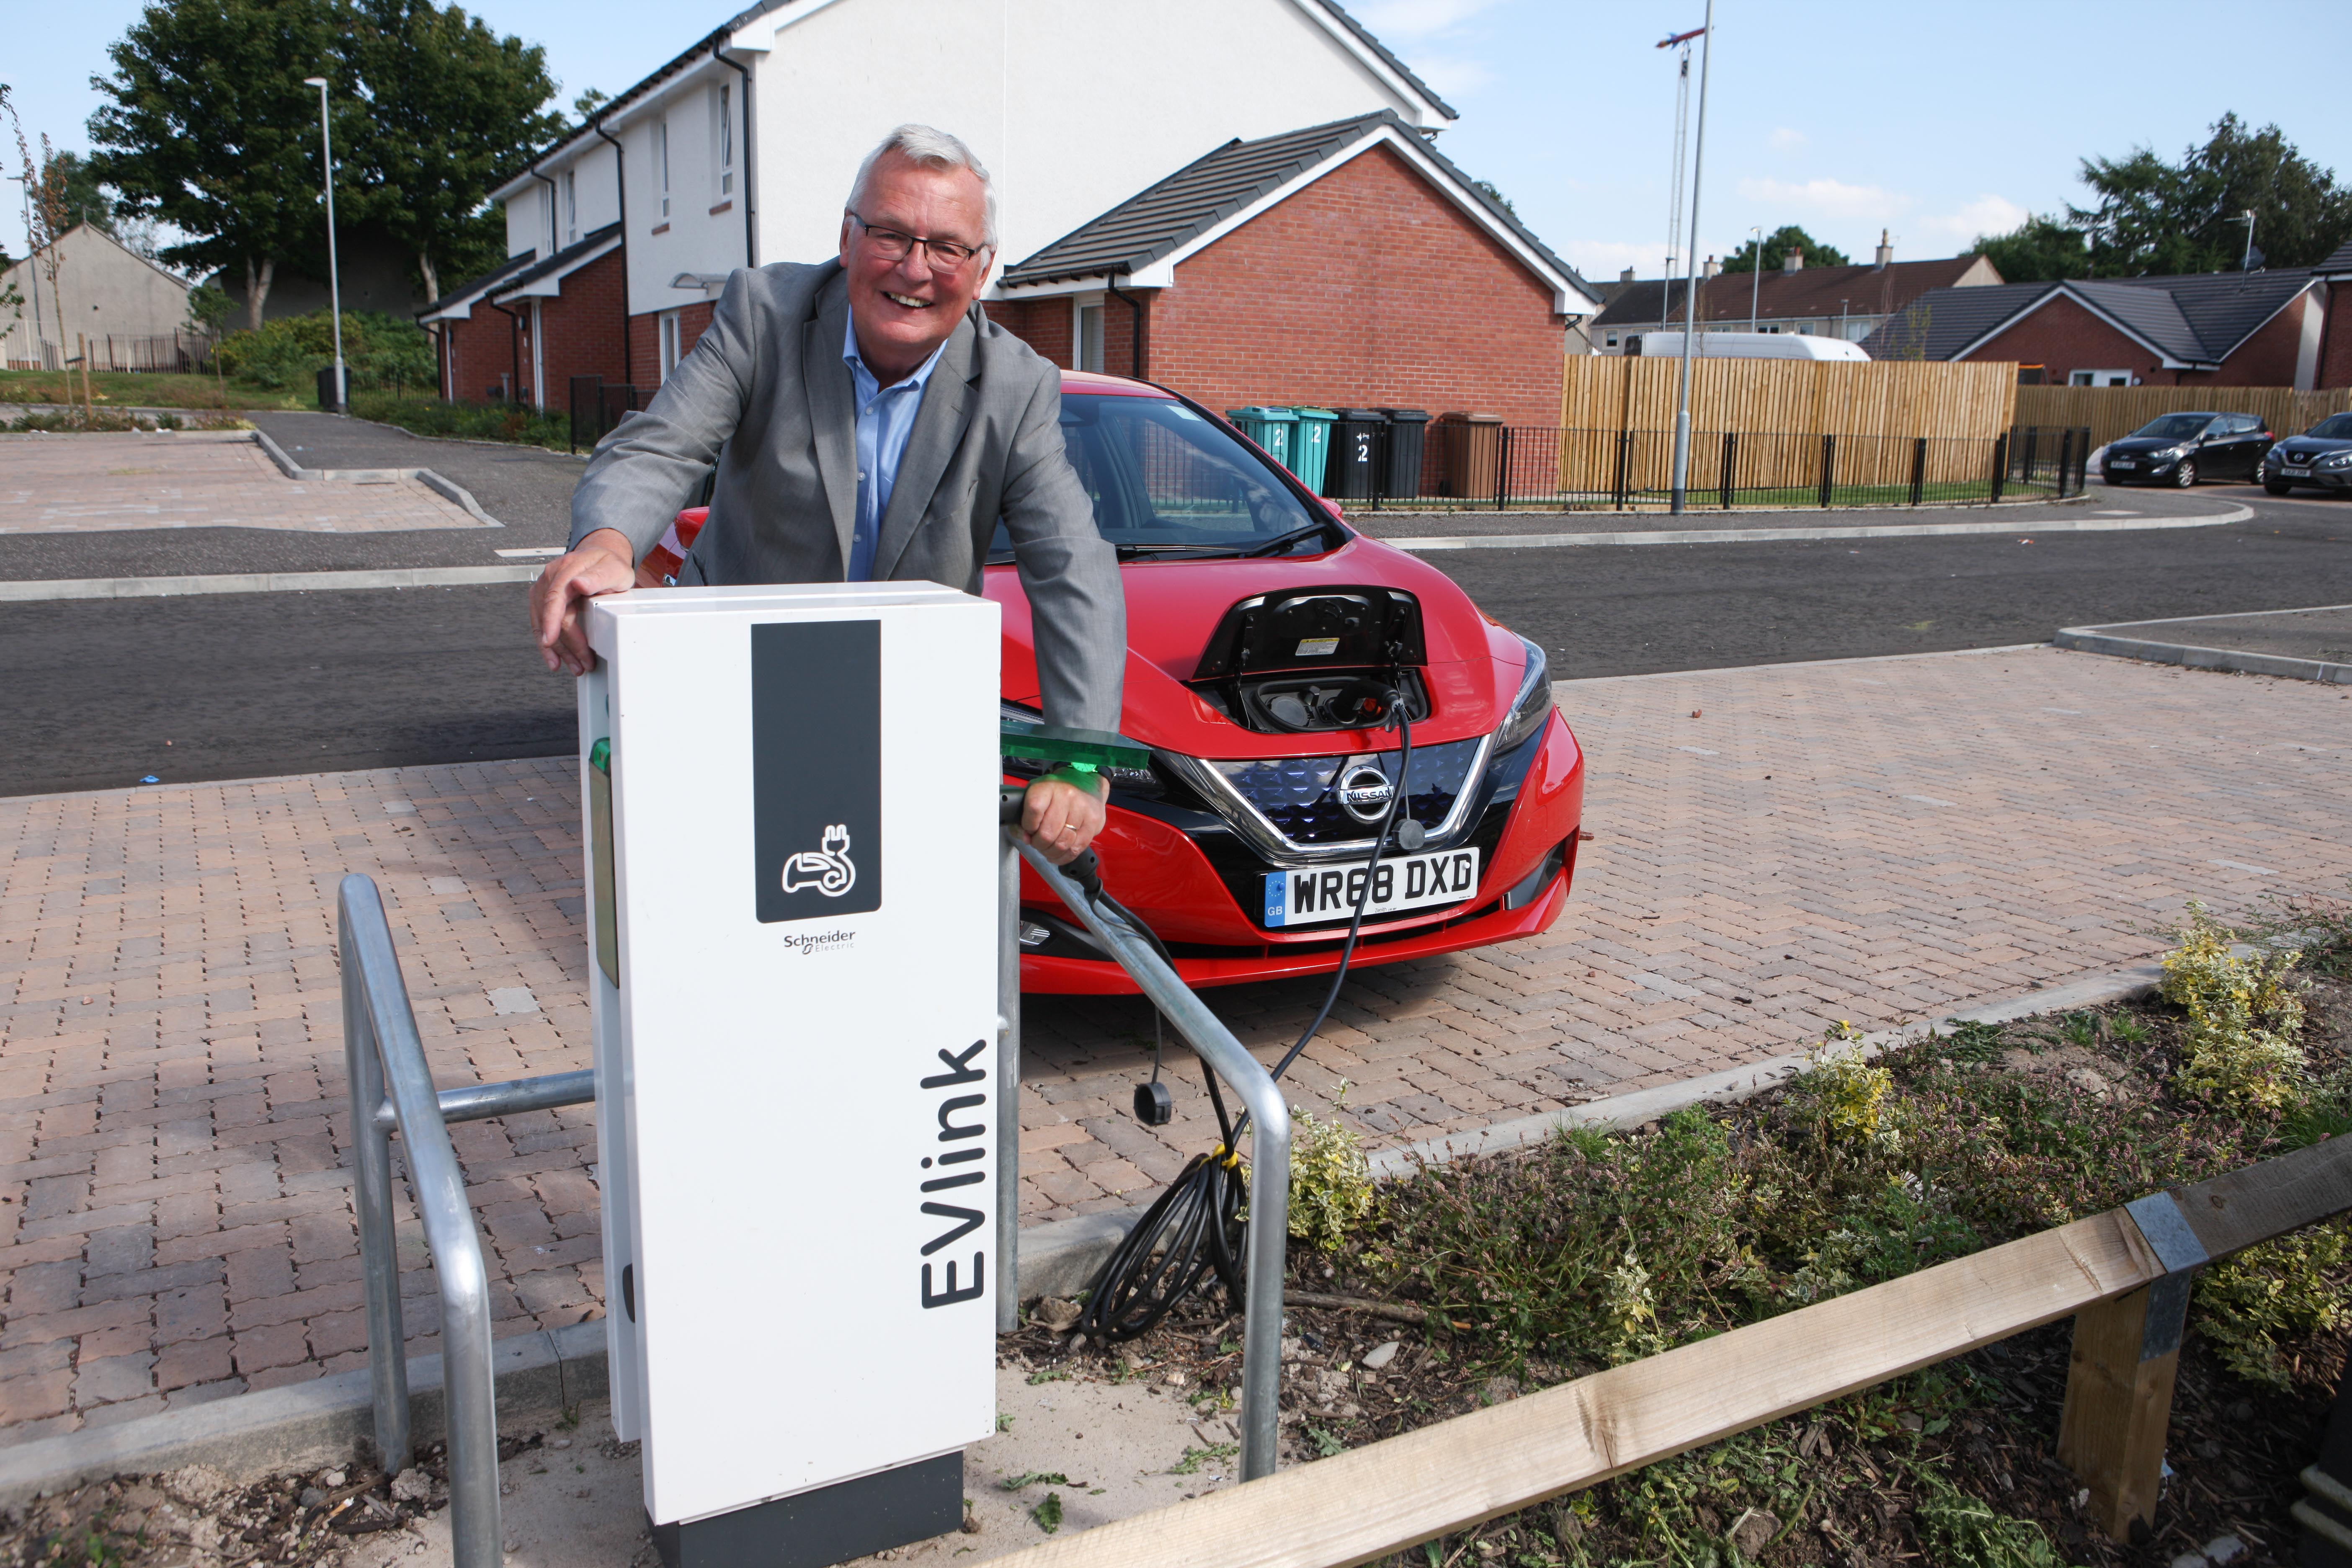 Sustainability is 'at the heart' of North Lanarkshire Council's new house building programme